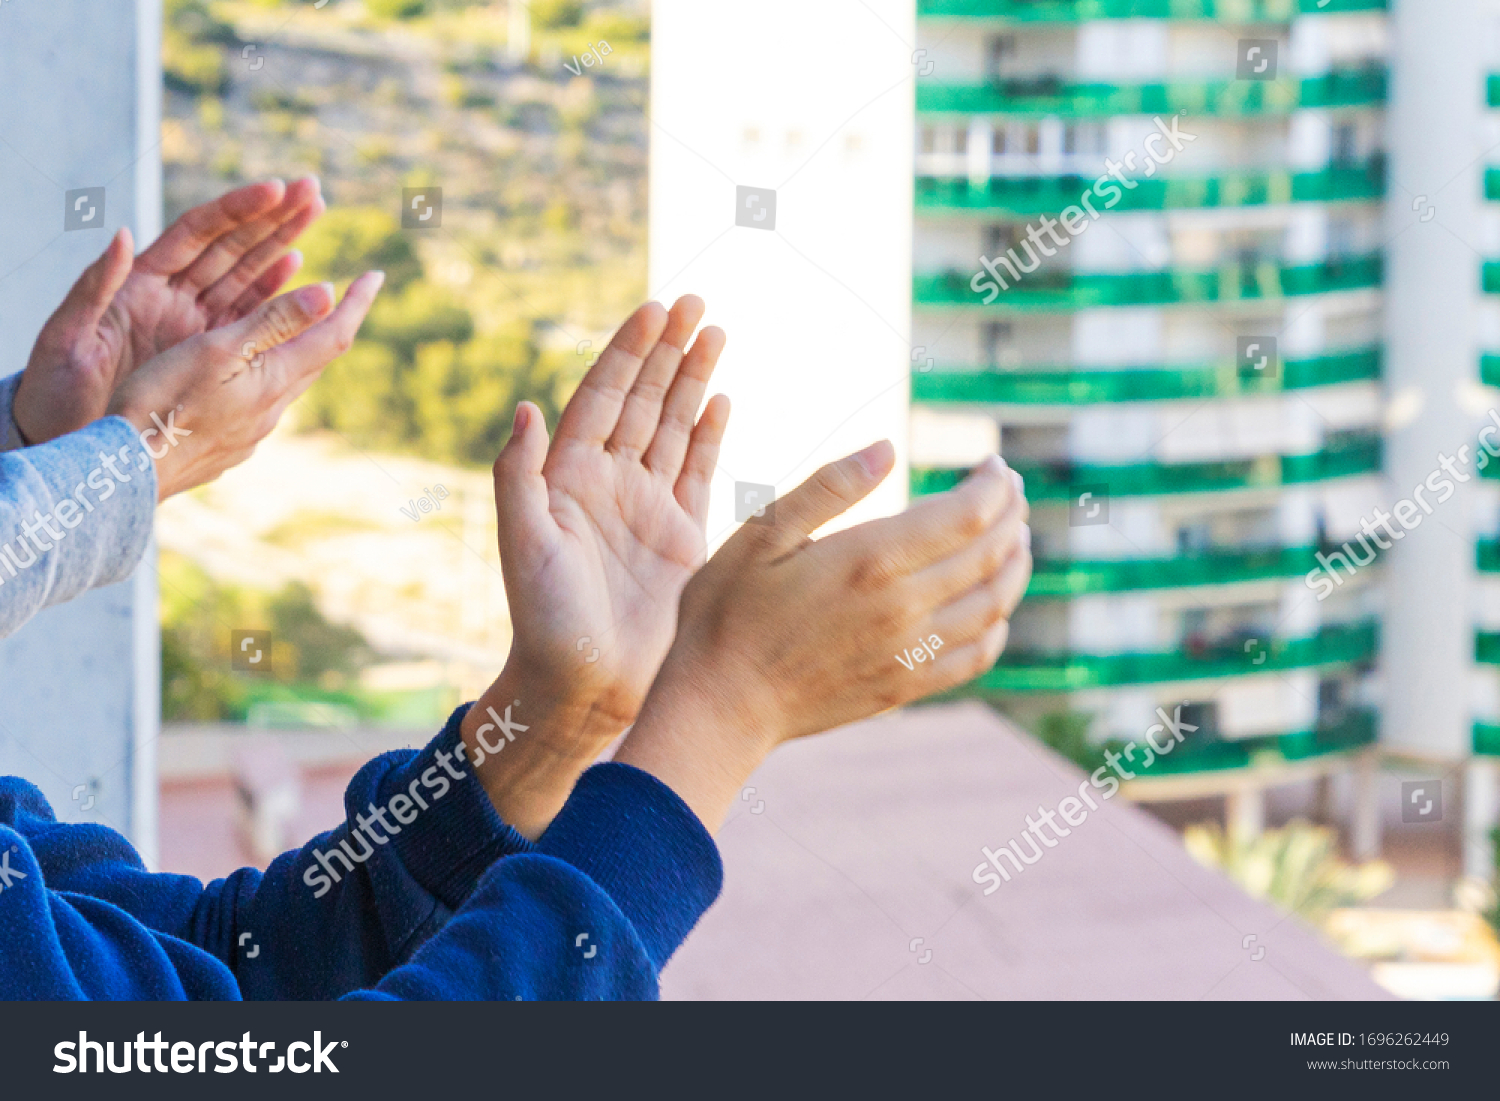 Family applauding medical staff from their balcony. People in Spain clapping on balconies and windows in support of health workers during the Coronavirus pandemic #1696262449